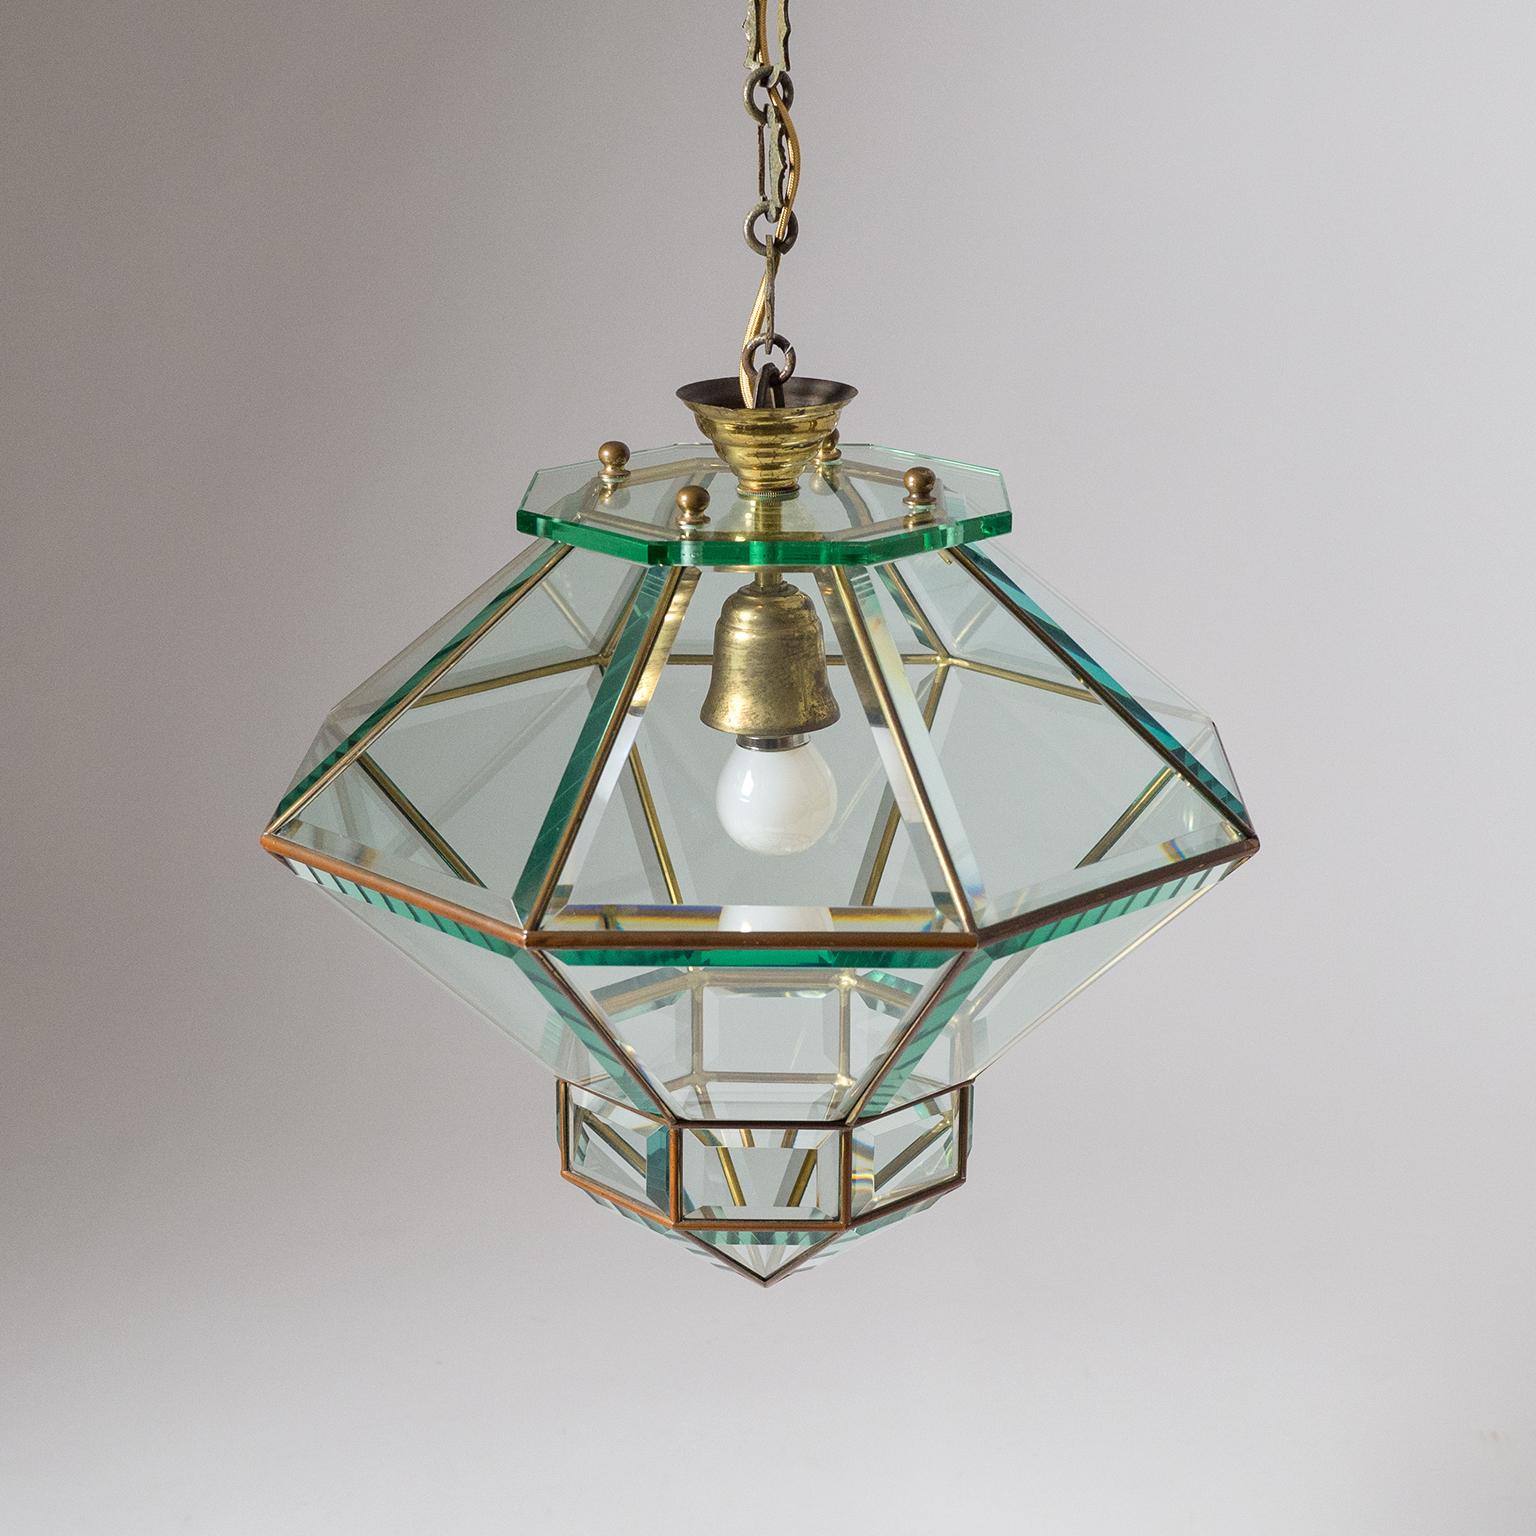 Mid-20th Century Italian 1940s Lantern, Faceted Glass and Brass